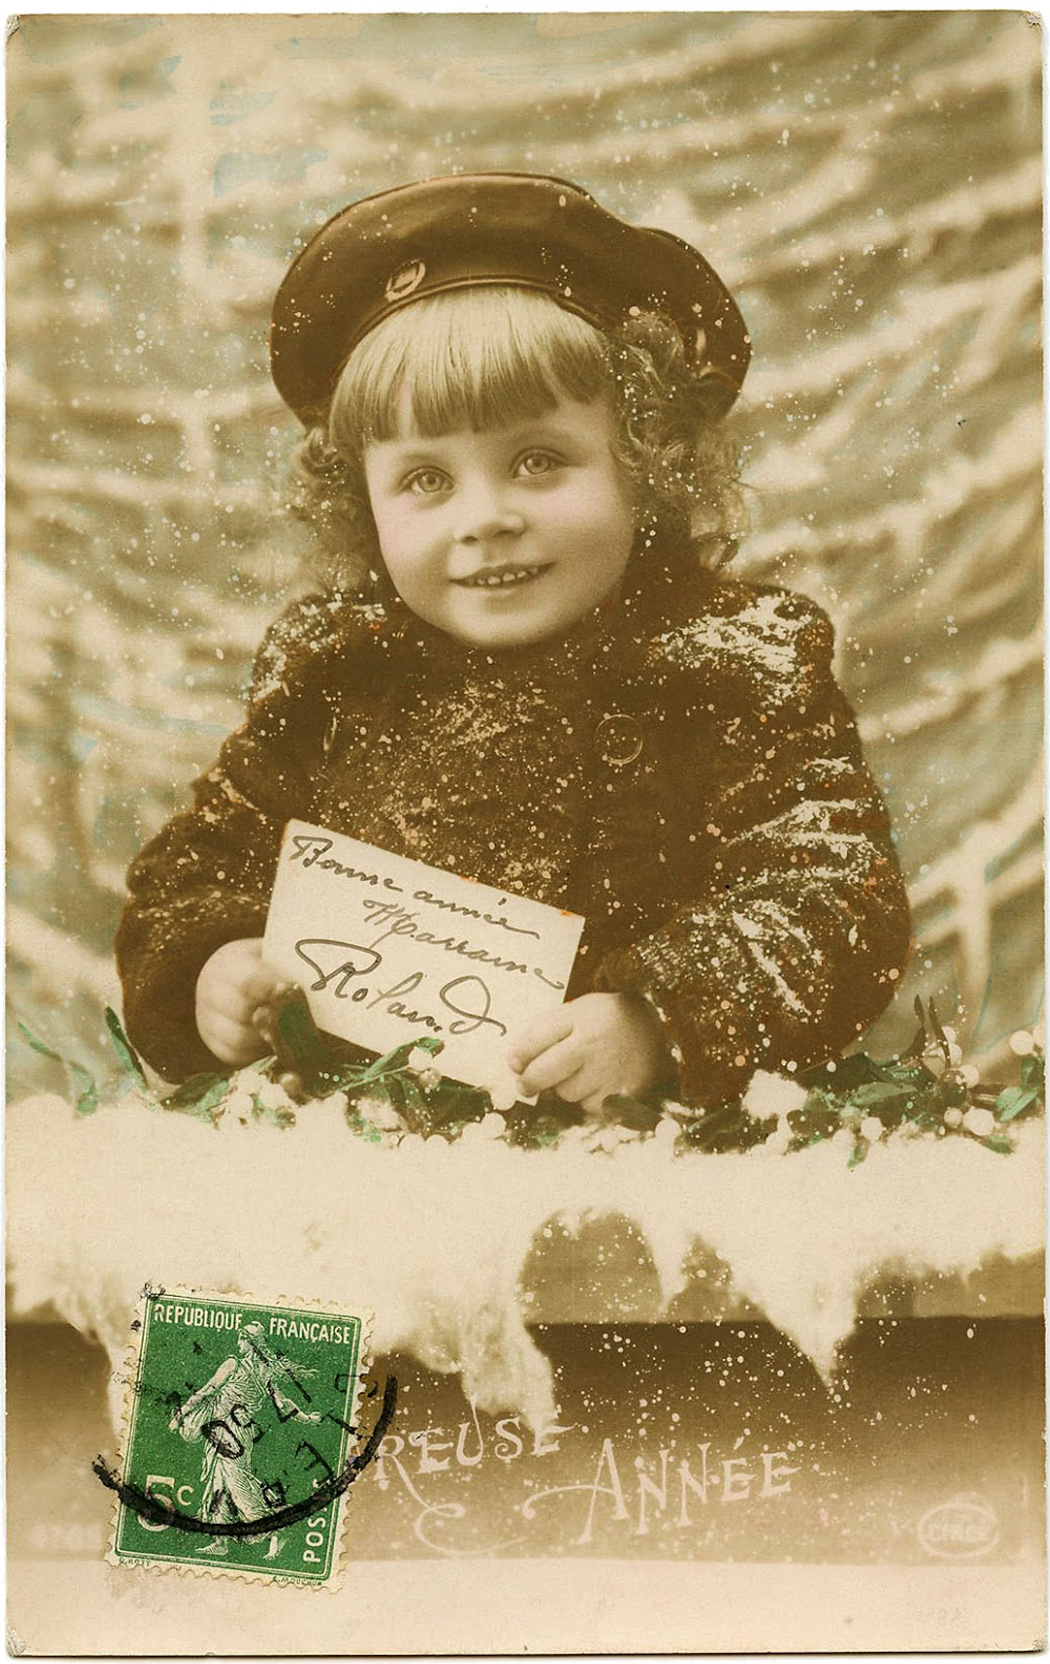 Bonne Année French Postcard Cute Girl holding Piglets Happy New Year Posted Vintage